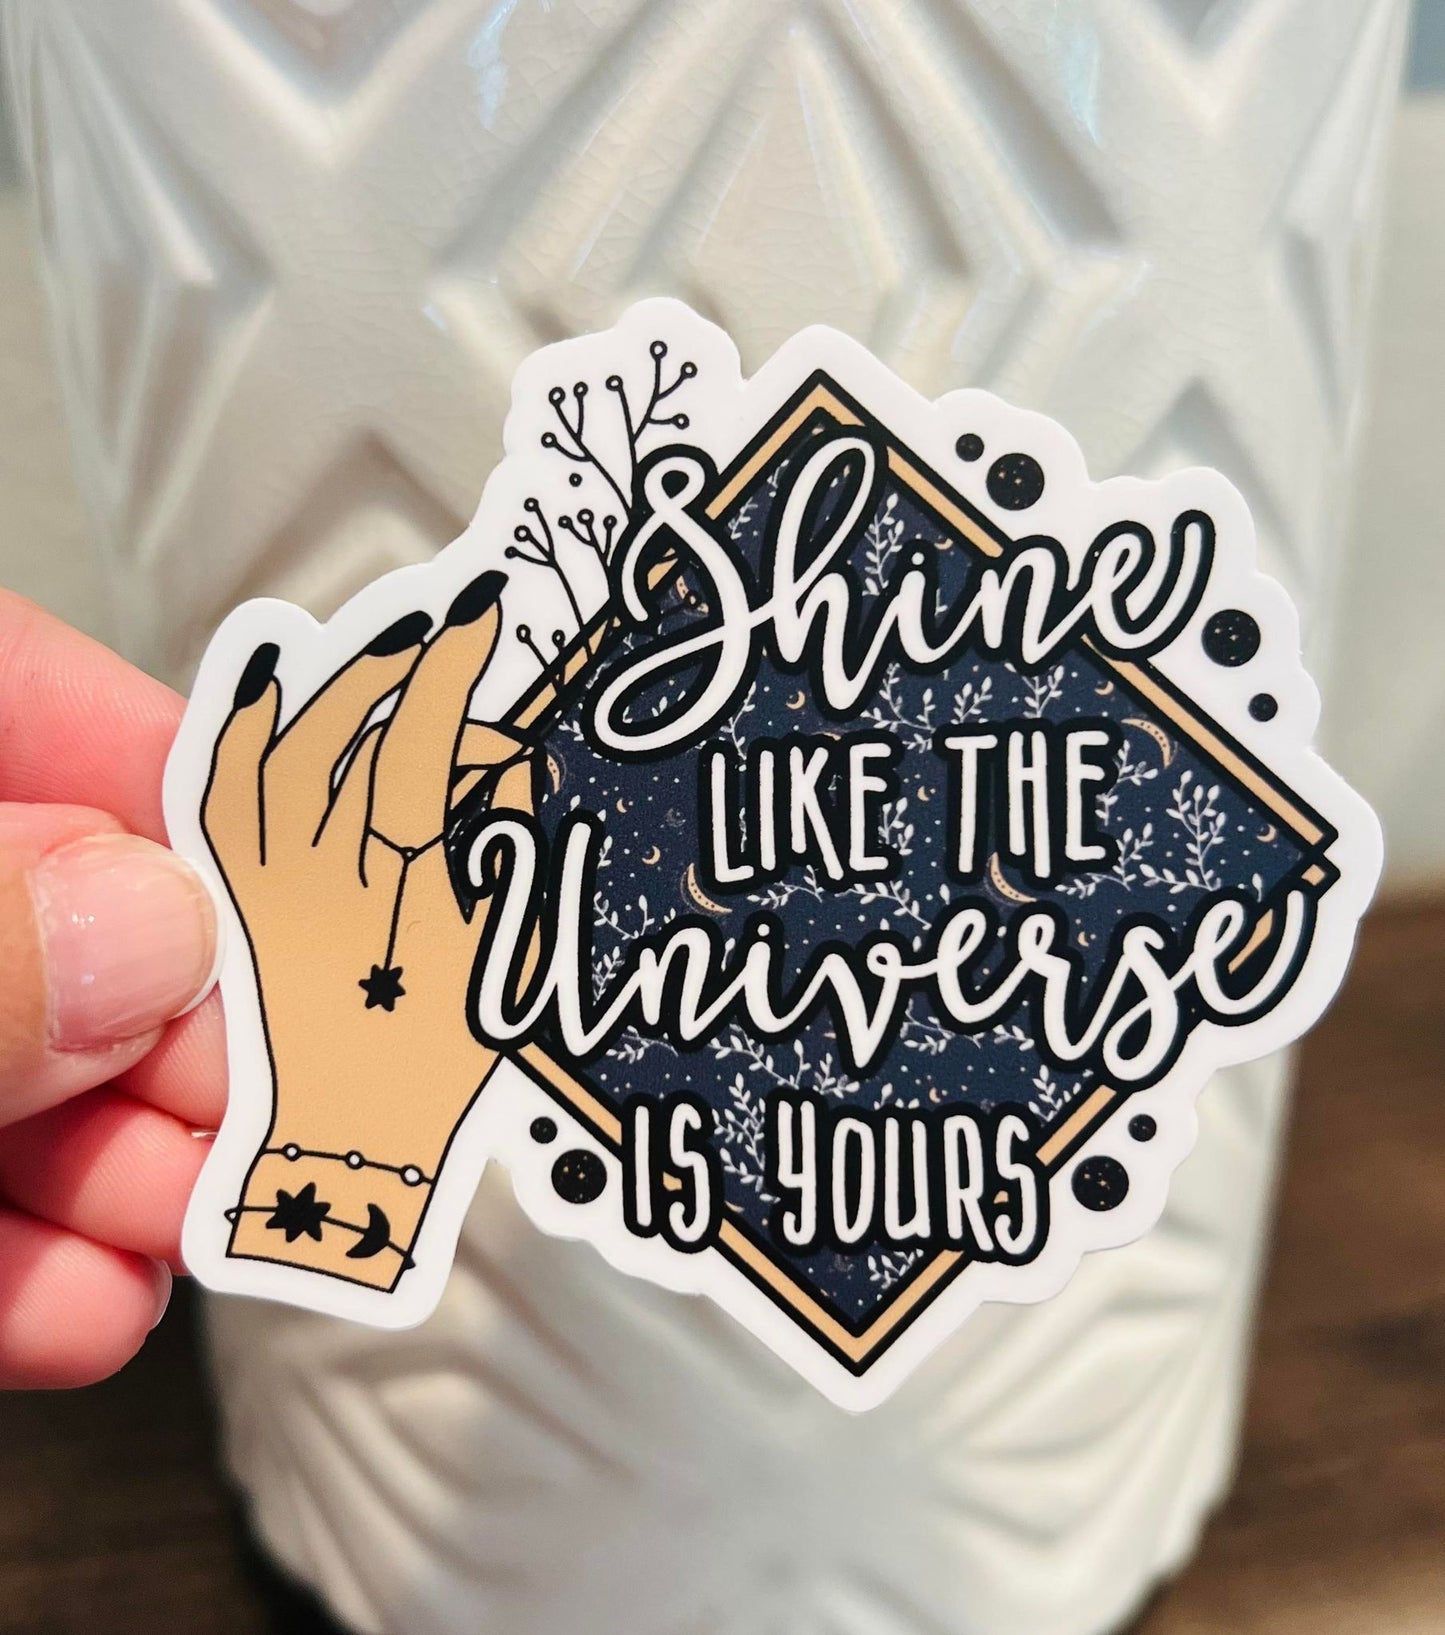 #1 Shine like the universe is yours Vinyl Sticker